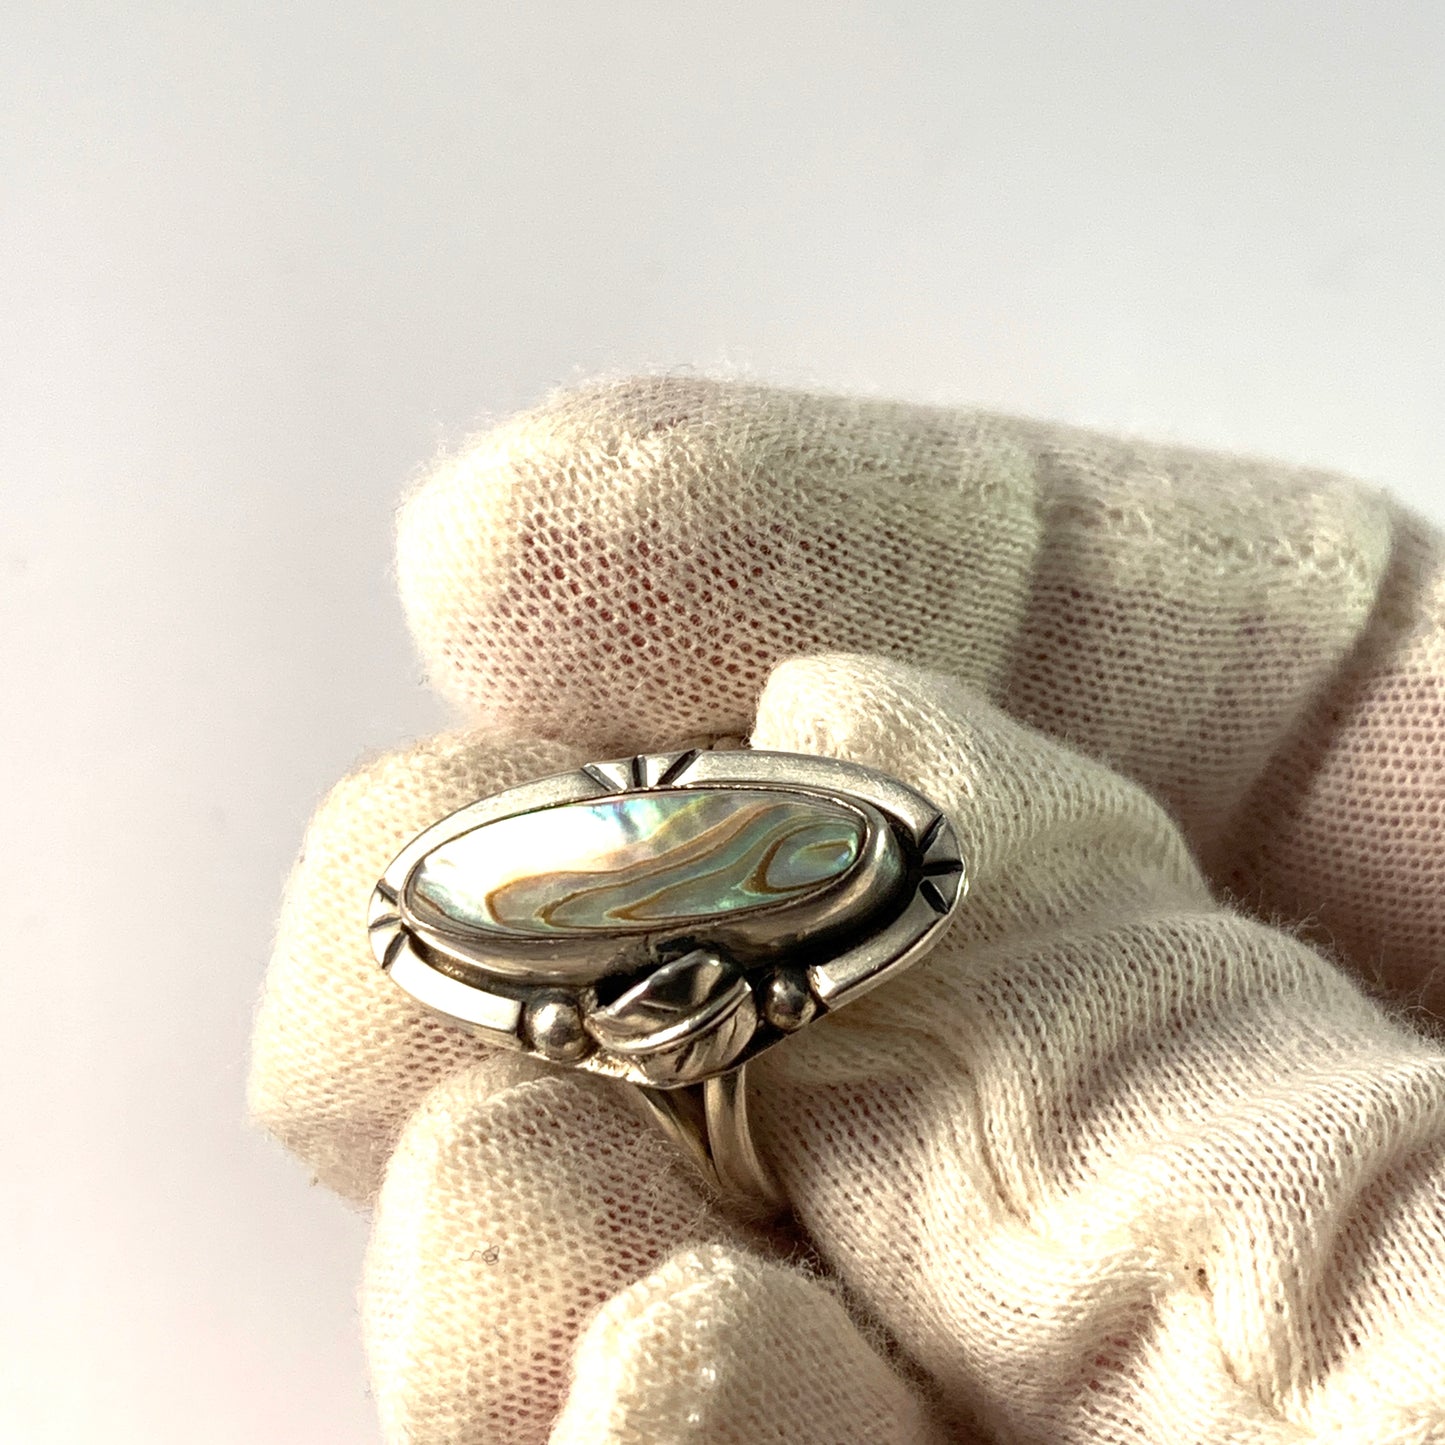 Maker GFI*, Mexico Vintage Mid Century Sterling Silver Abalone Ring.